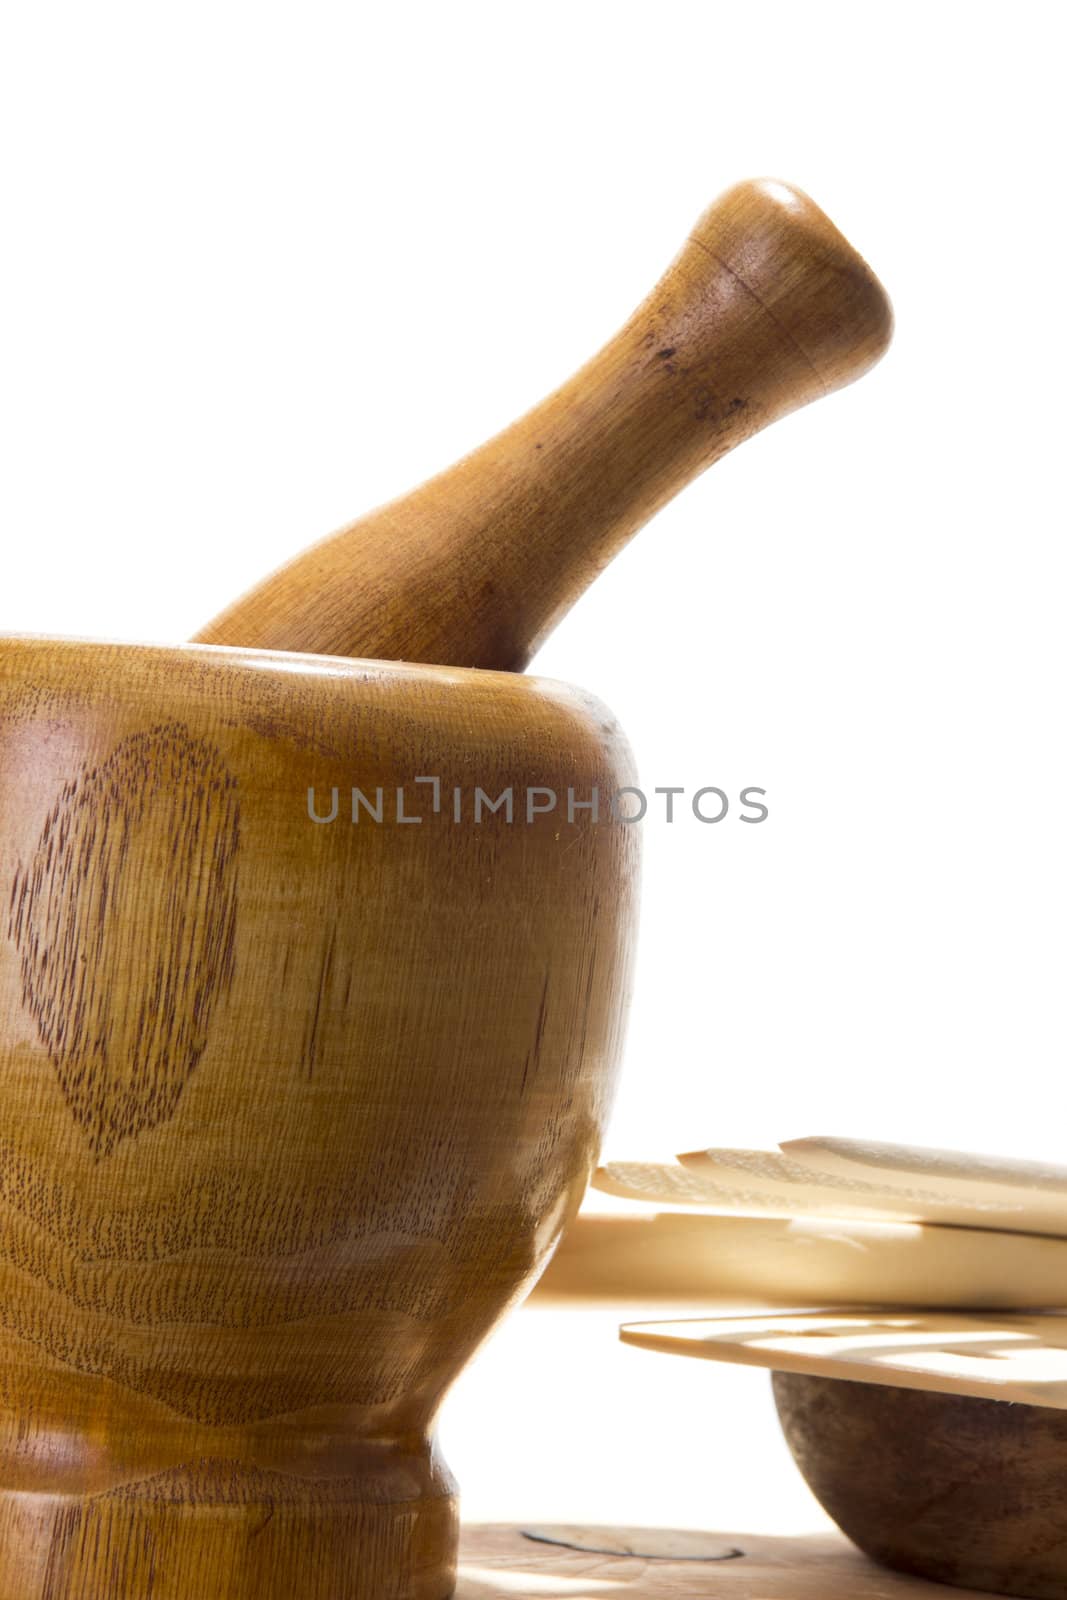 Wooden mortar and pestle on white background. Traditional kitchen equipment.